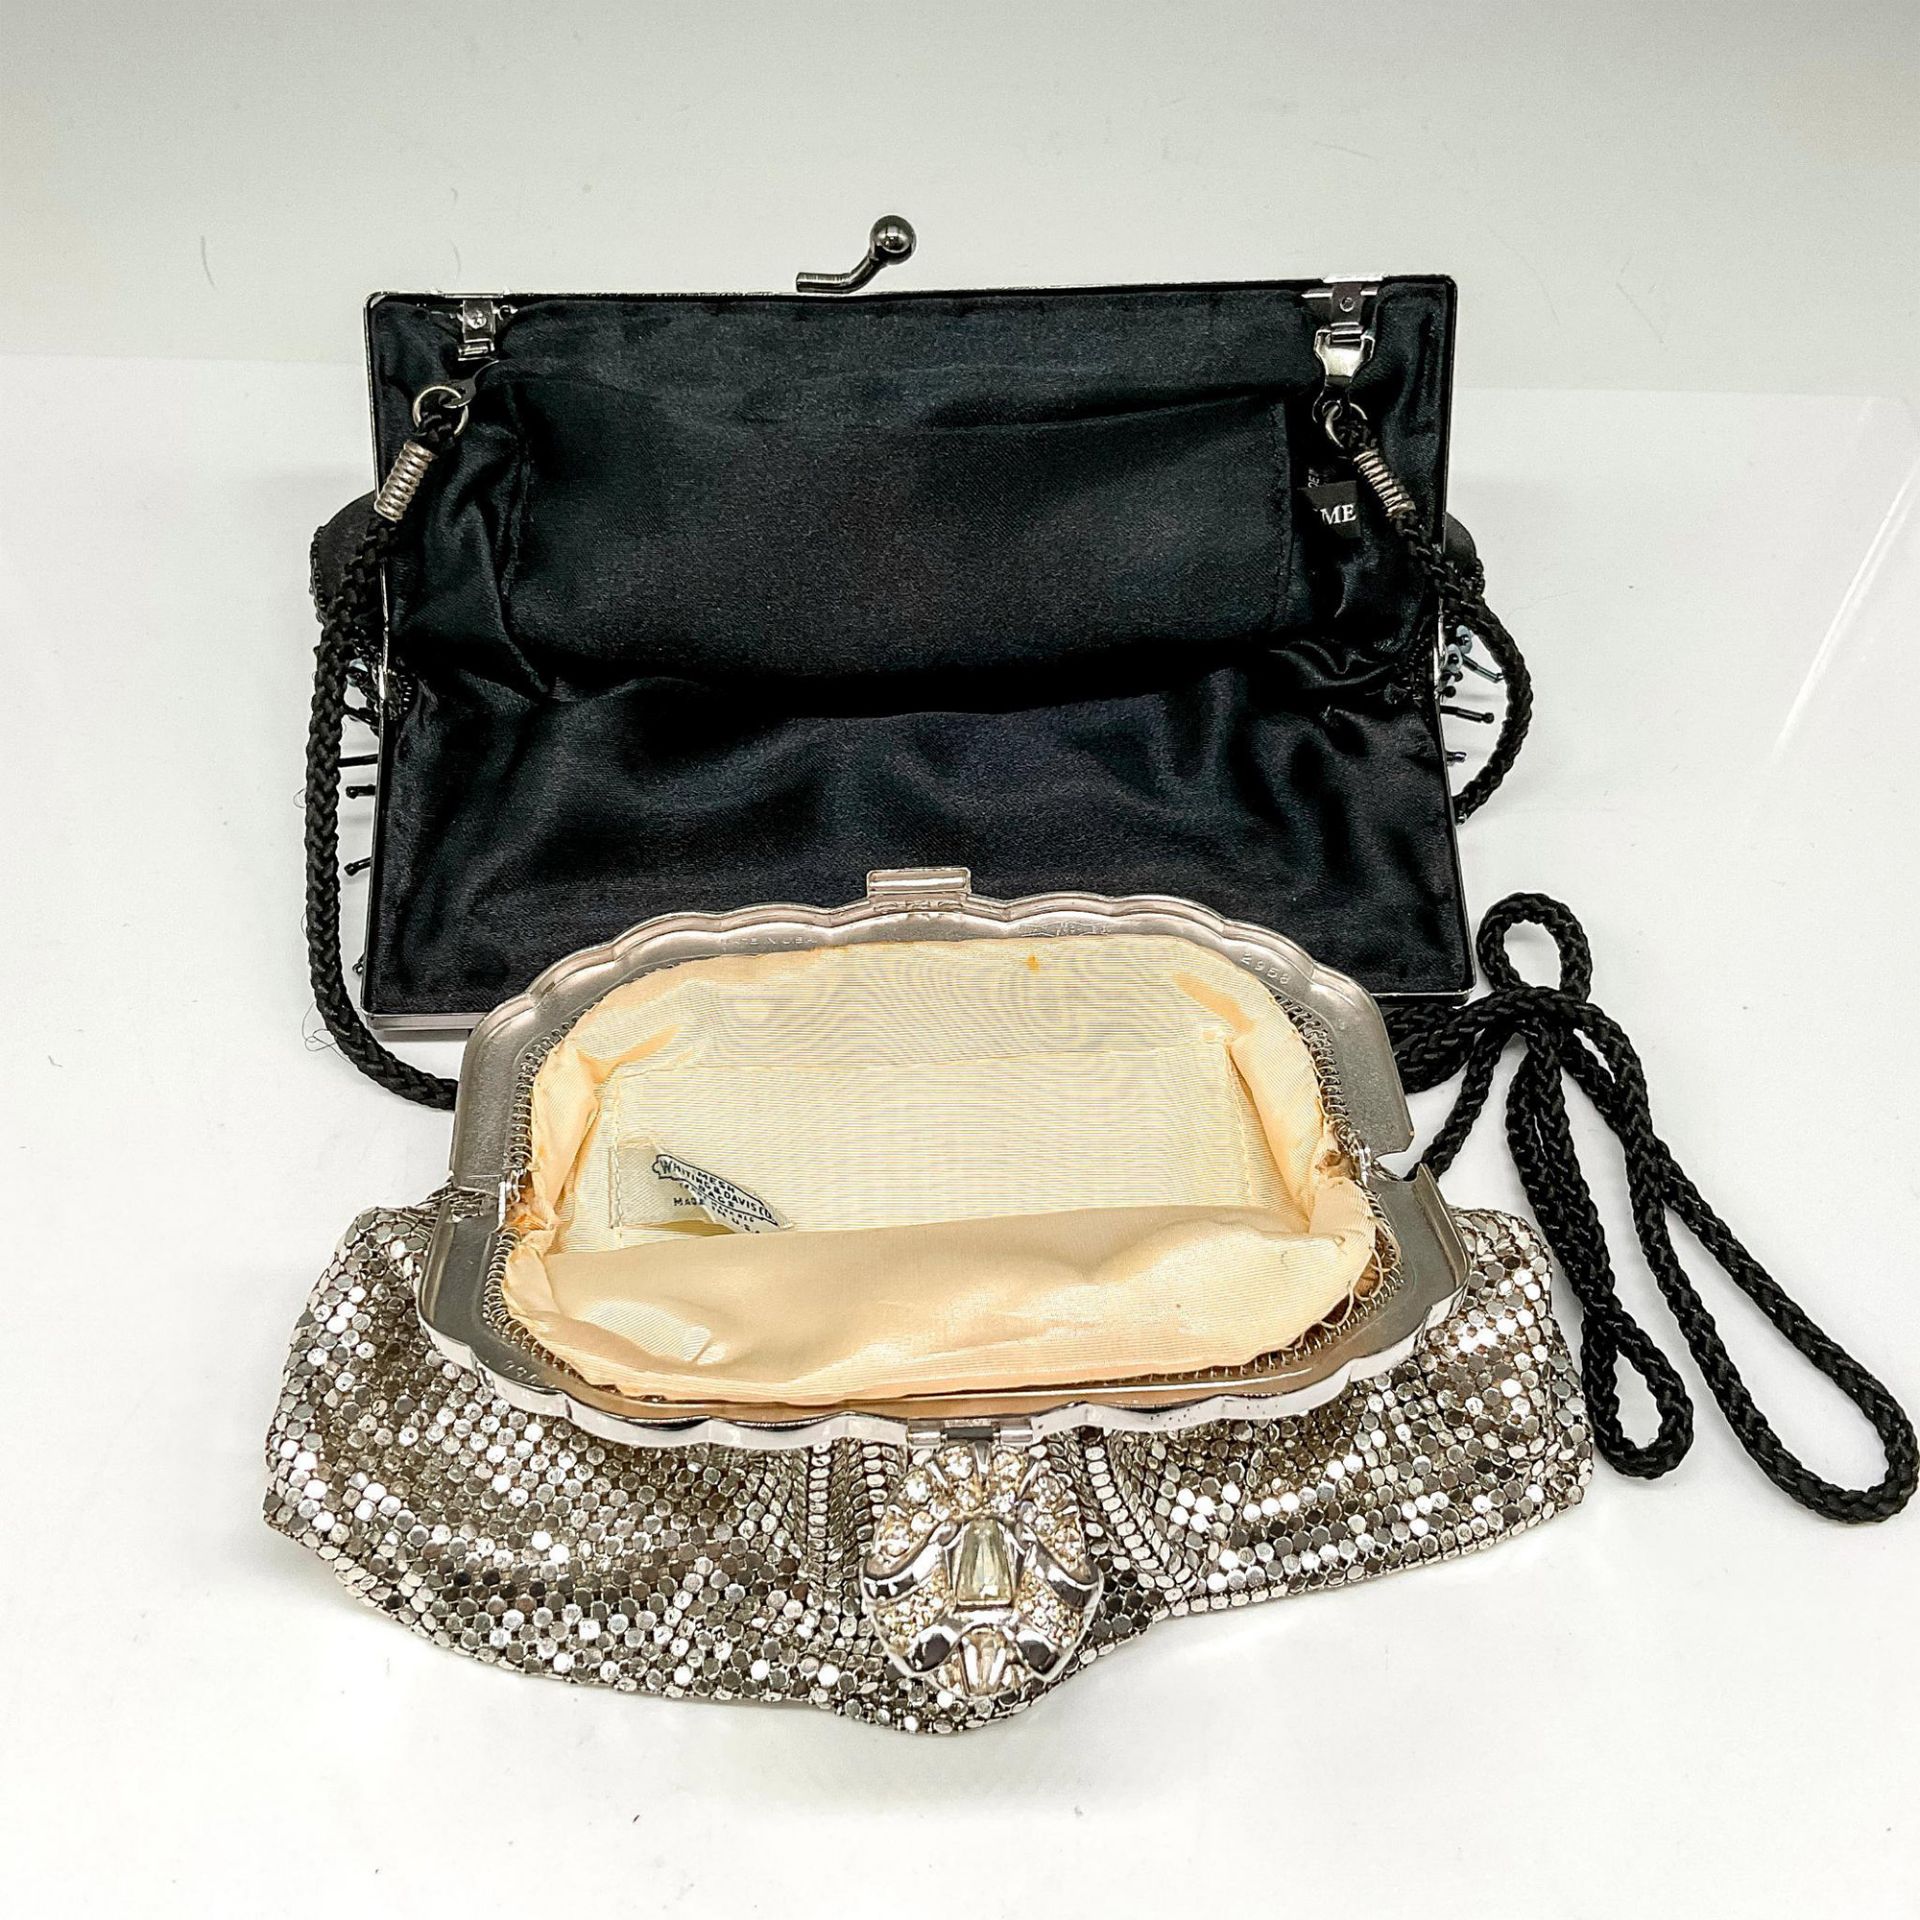 2pc Whiting & Davis and Lancome Evening Bags - Image 3 of 3